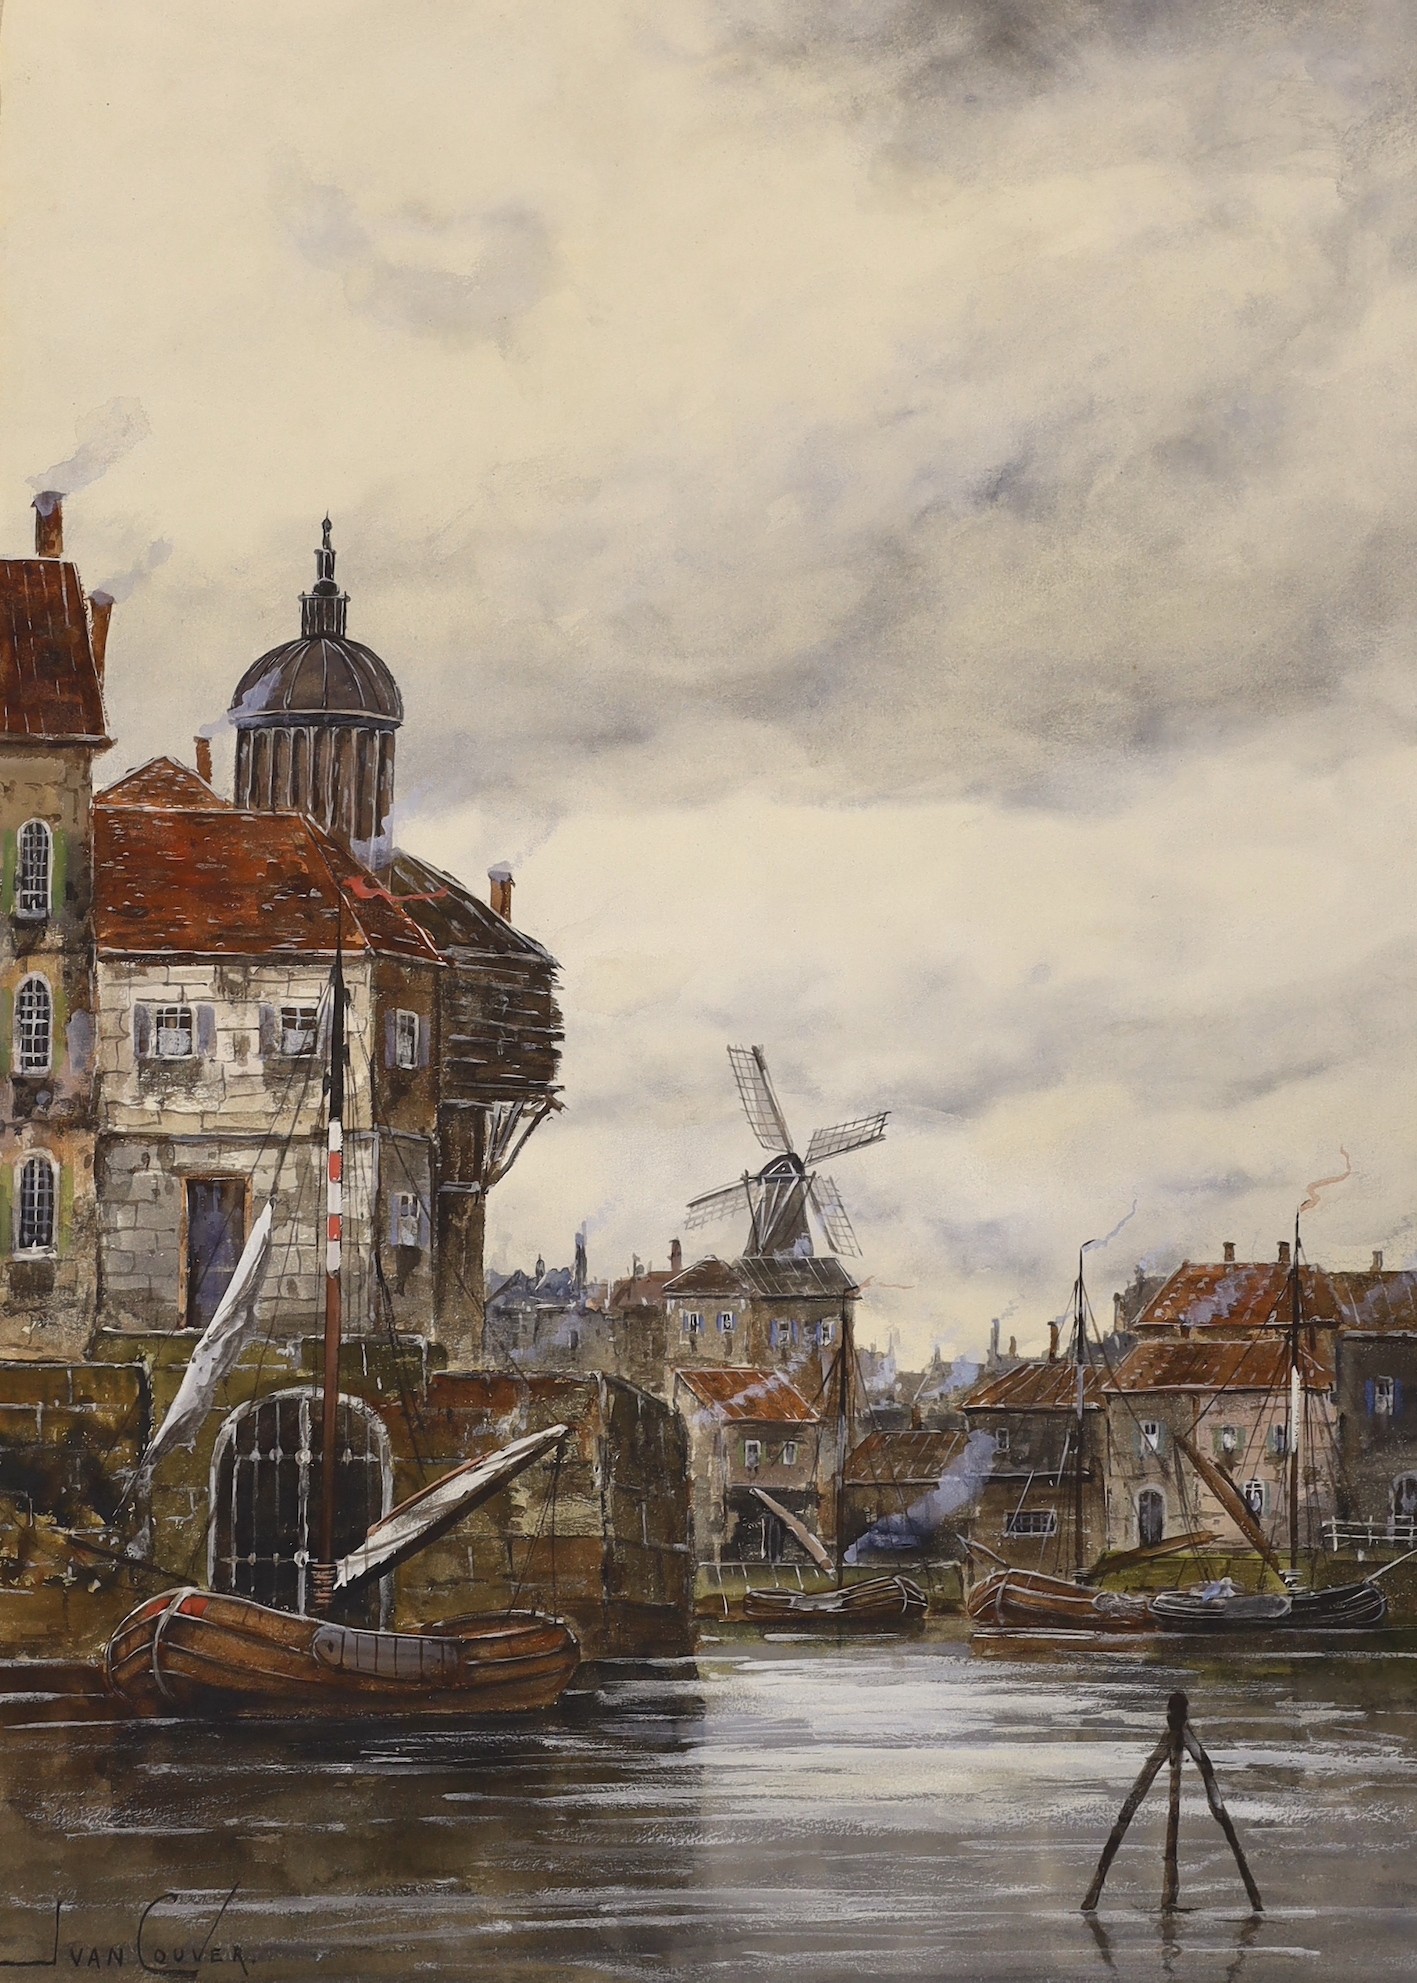 Jan Van Couver (1836-1909), oil on board, topographical view of Dutch canal town, signed, 53 x 38cm, together with a Johannes Hermanus Koekkoek (1778-1851), oil on board, Windmill by a canal, both 53 x 38cm